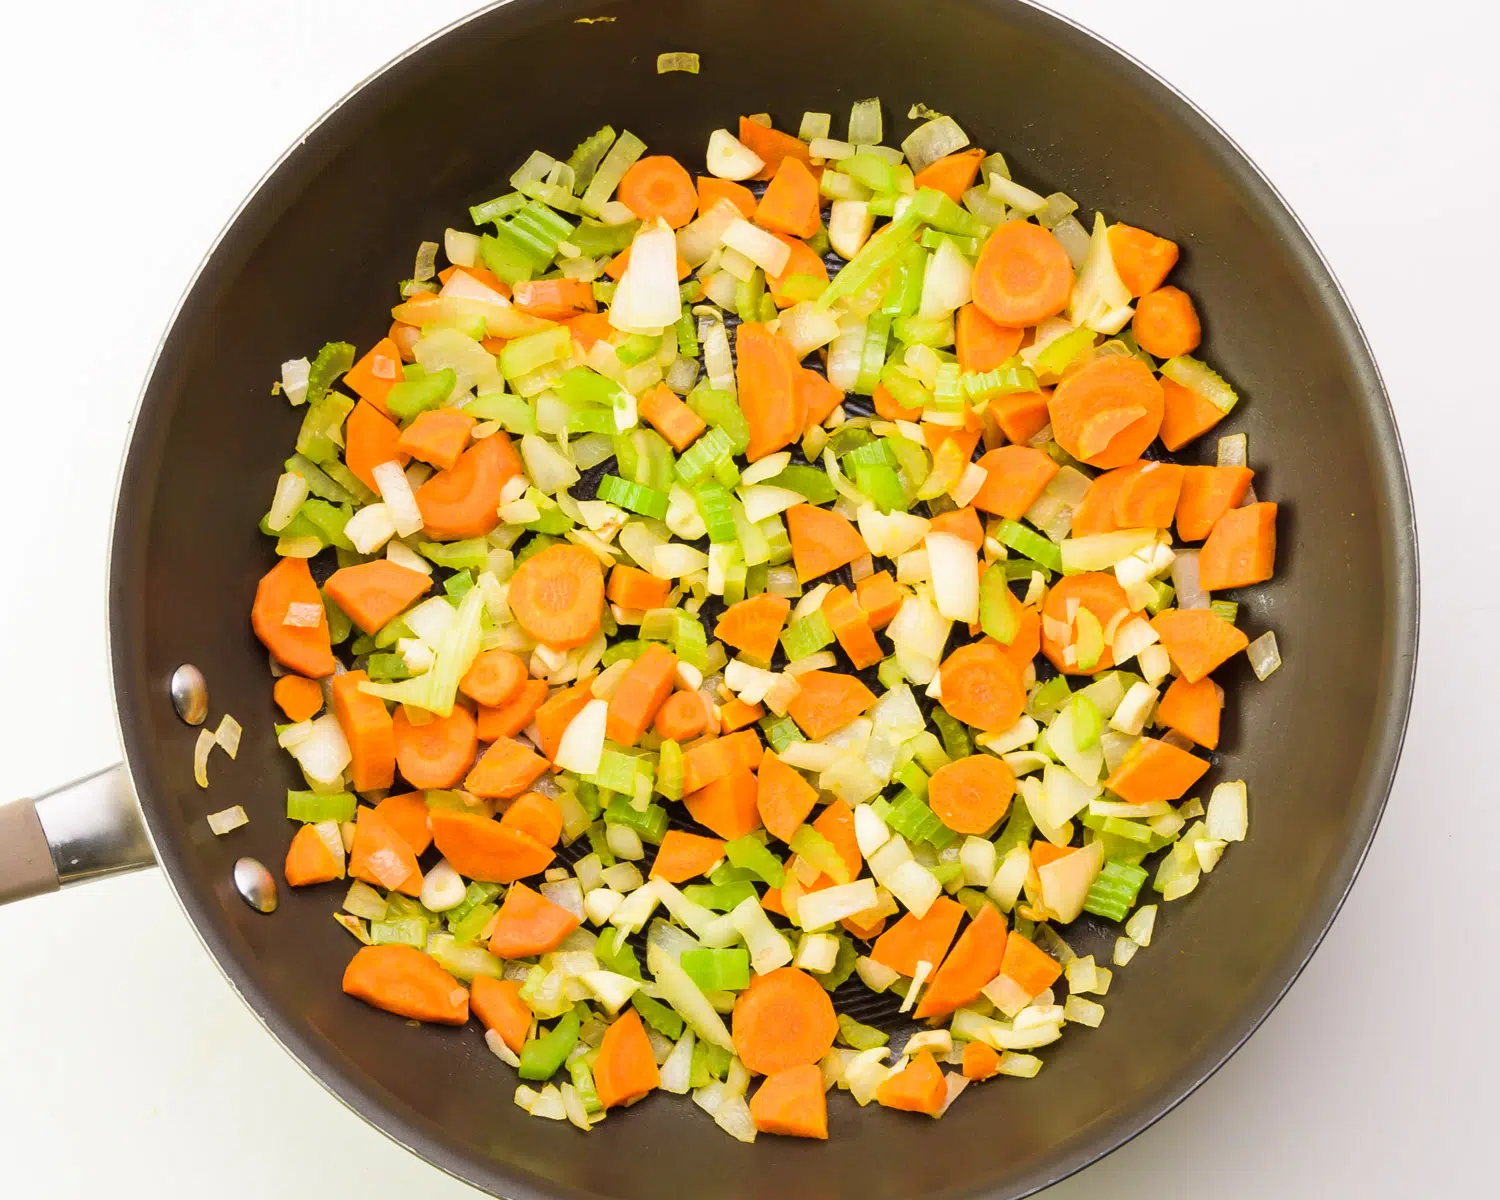 Carrots, onions, and celery are being cooked in a skillet.